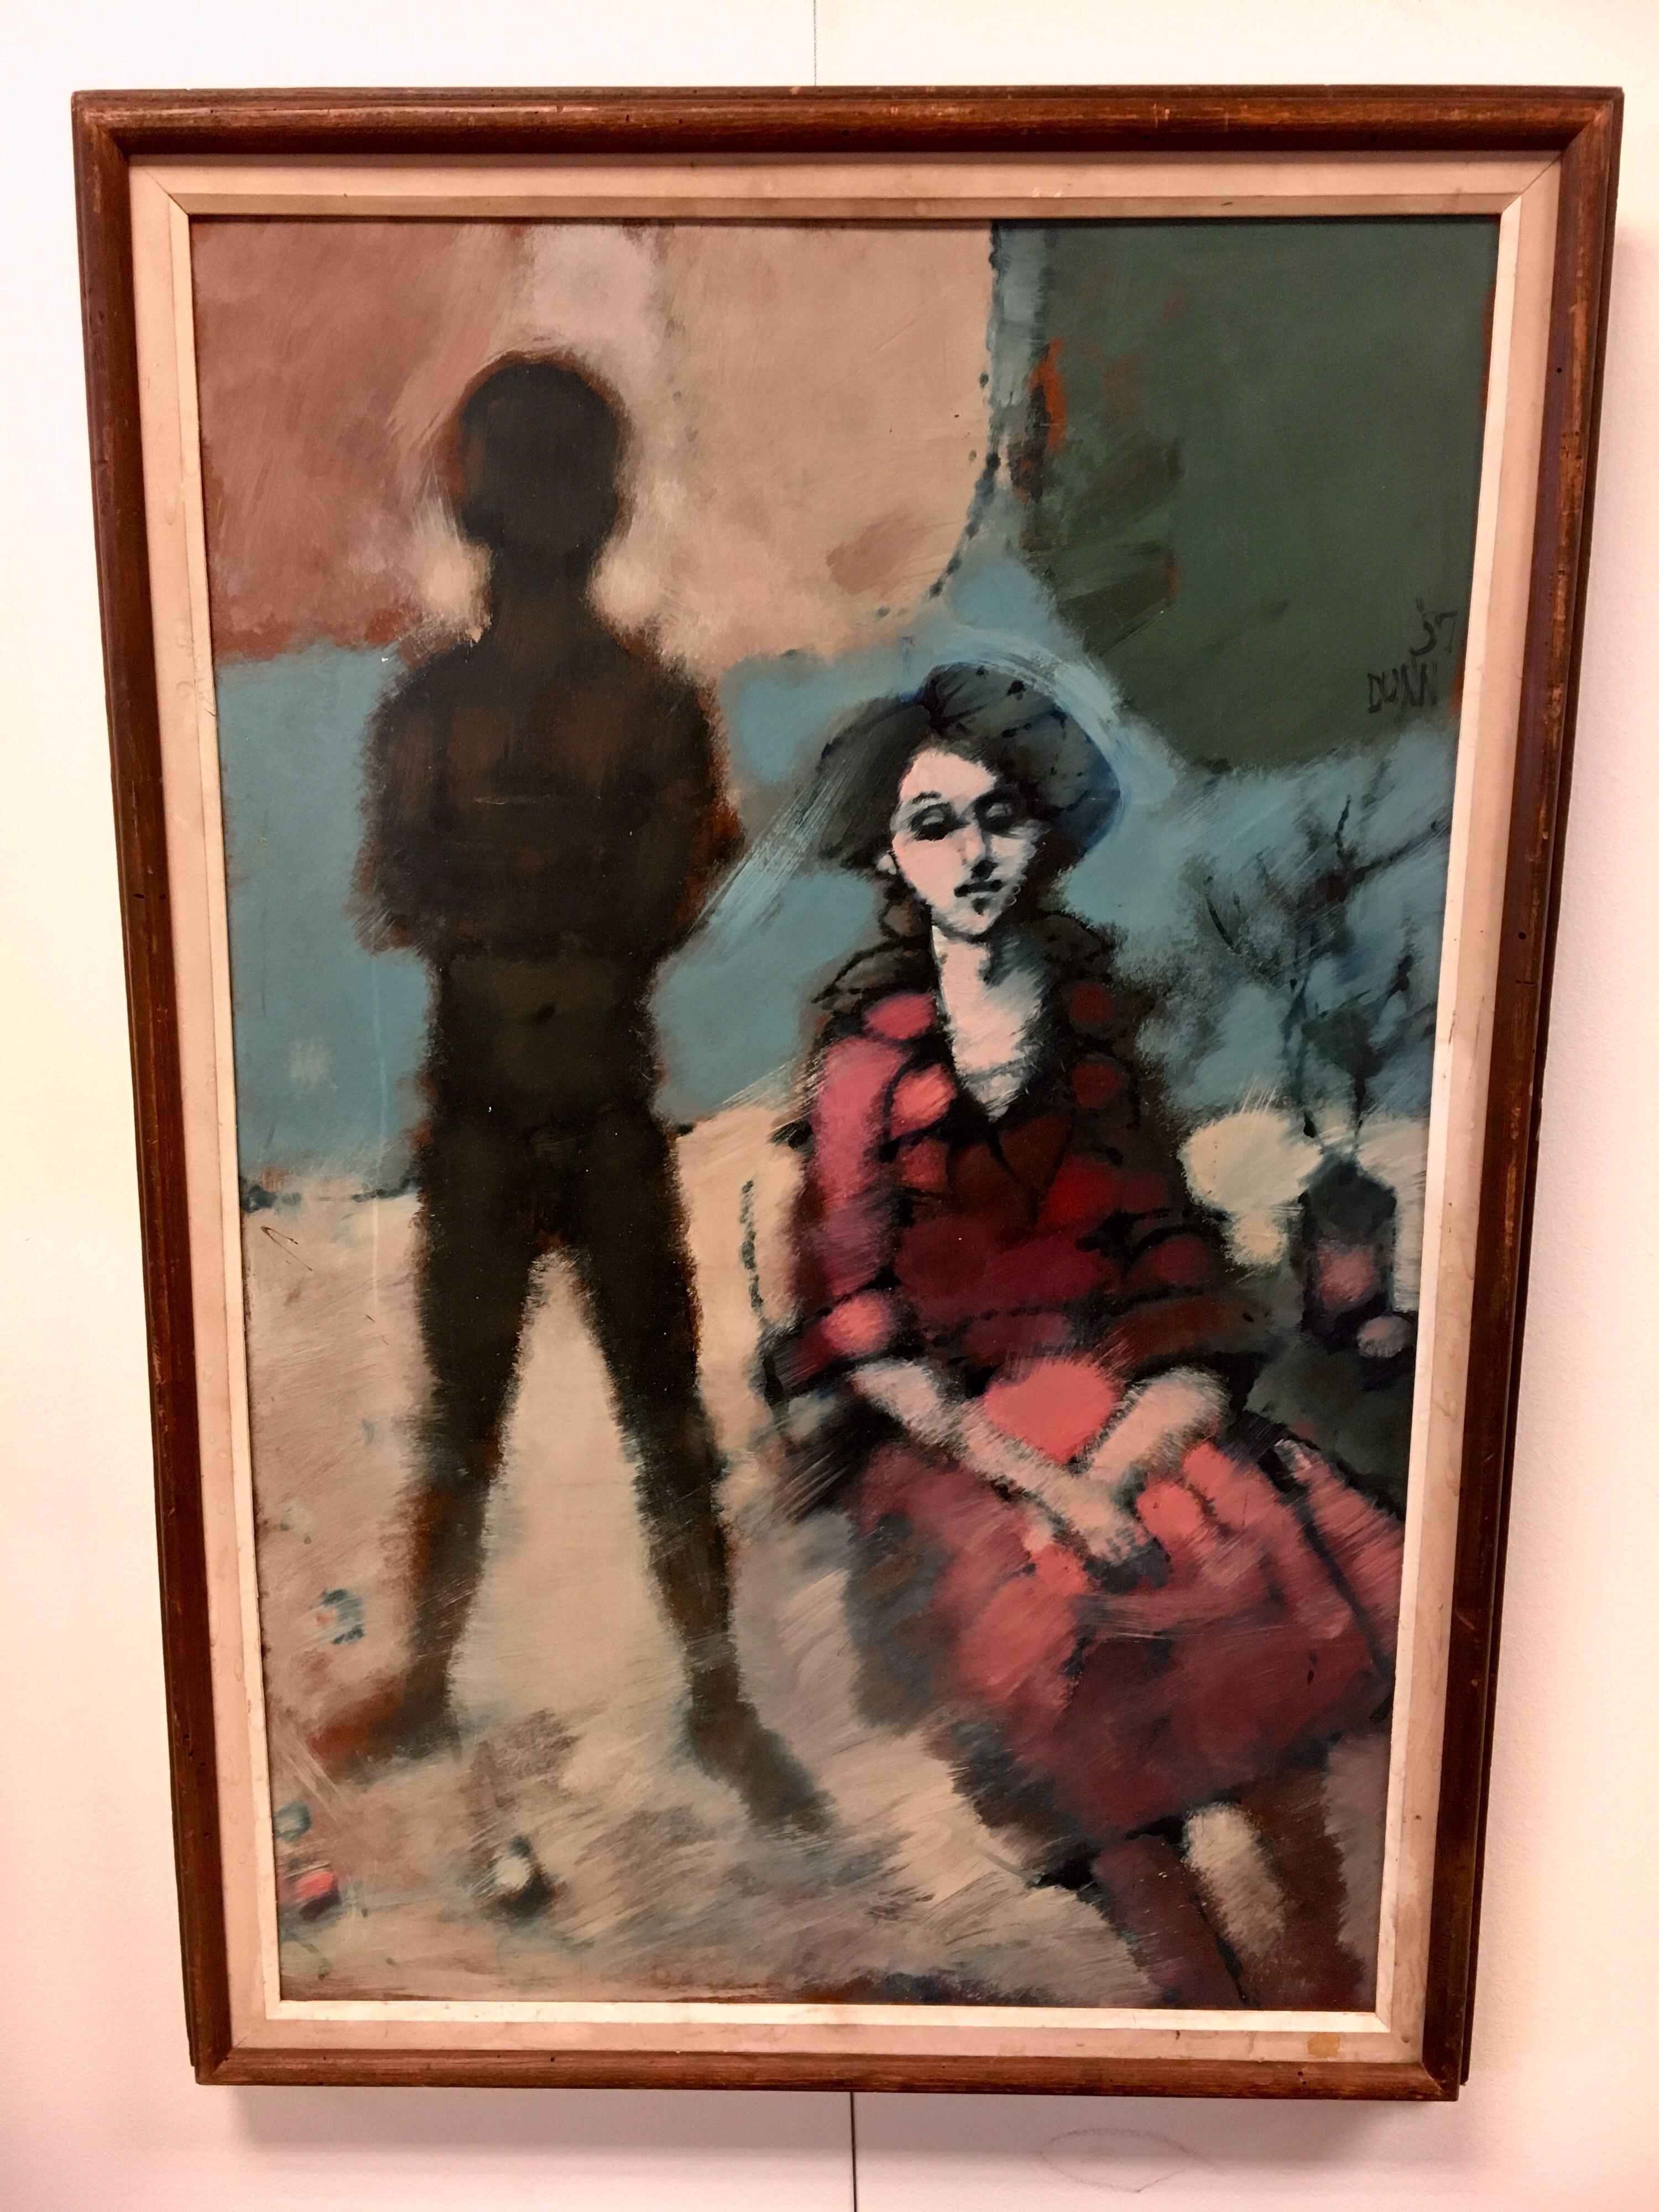 Stunning artist-signed original painting dated 1957 by the artist Dunn, signed on right side. A moving portrait of a contemplative female who is being watched over by an unknown figure. The medium is oil on board and frame is original.
 